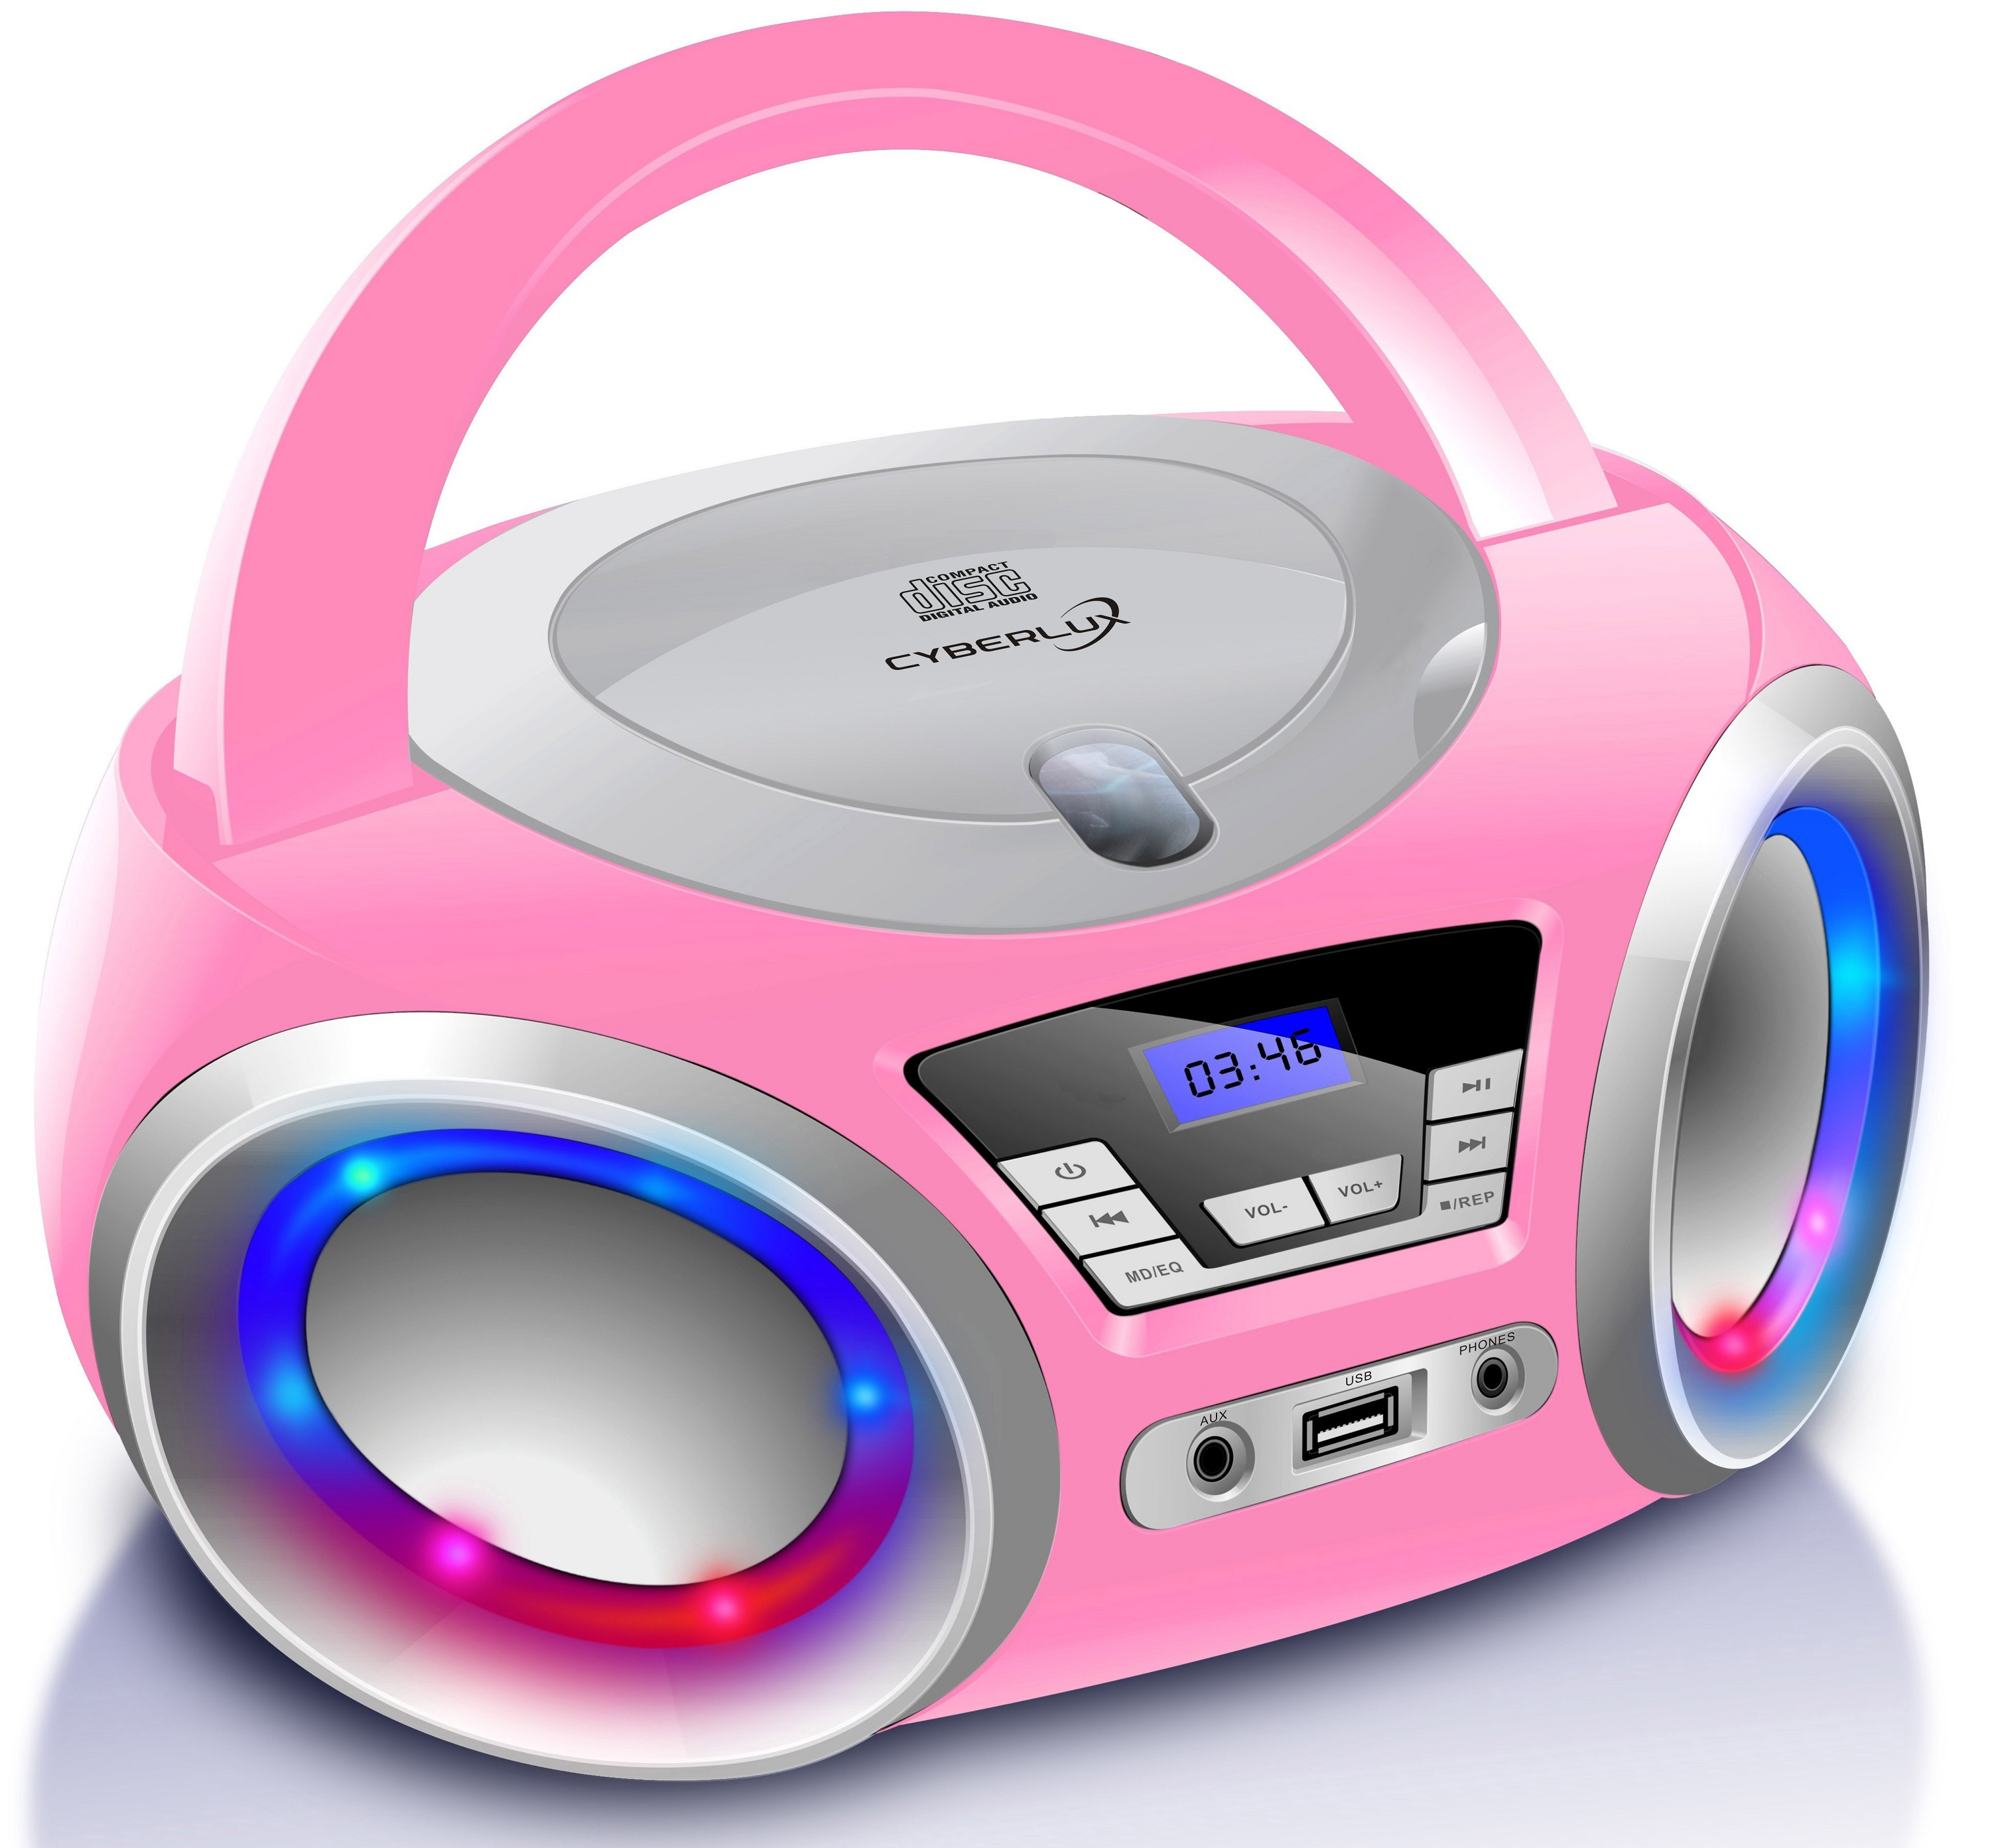 CL-910 Tragbares | Radio Loopy LED-Beleuchtung Pink | Kopfhöreranschluss CYBERLUX CD-Player Stereo mit